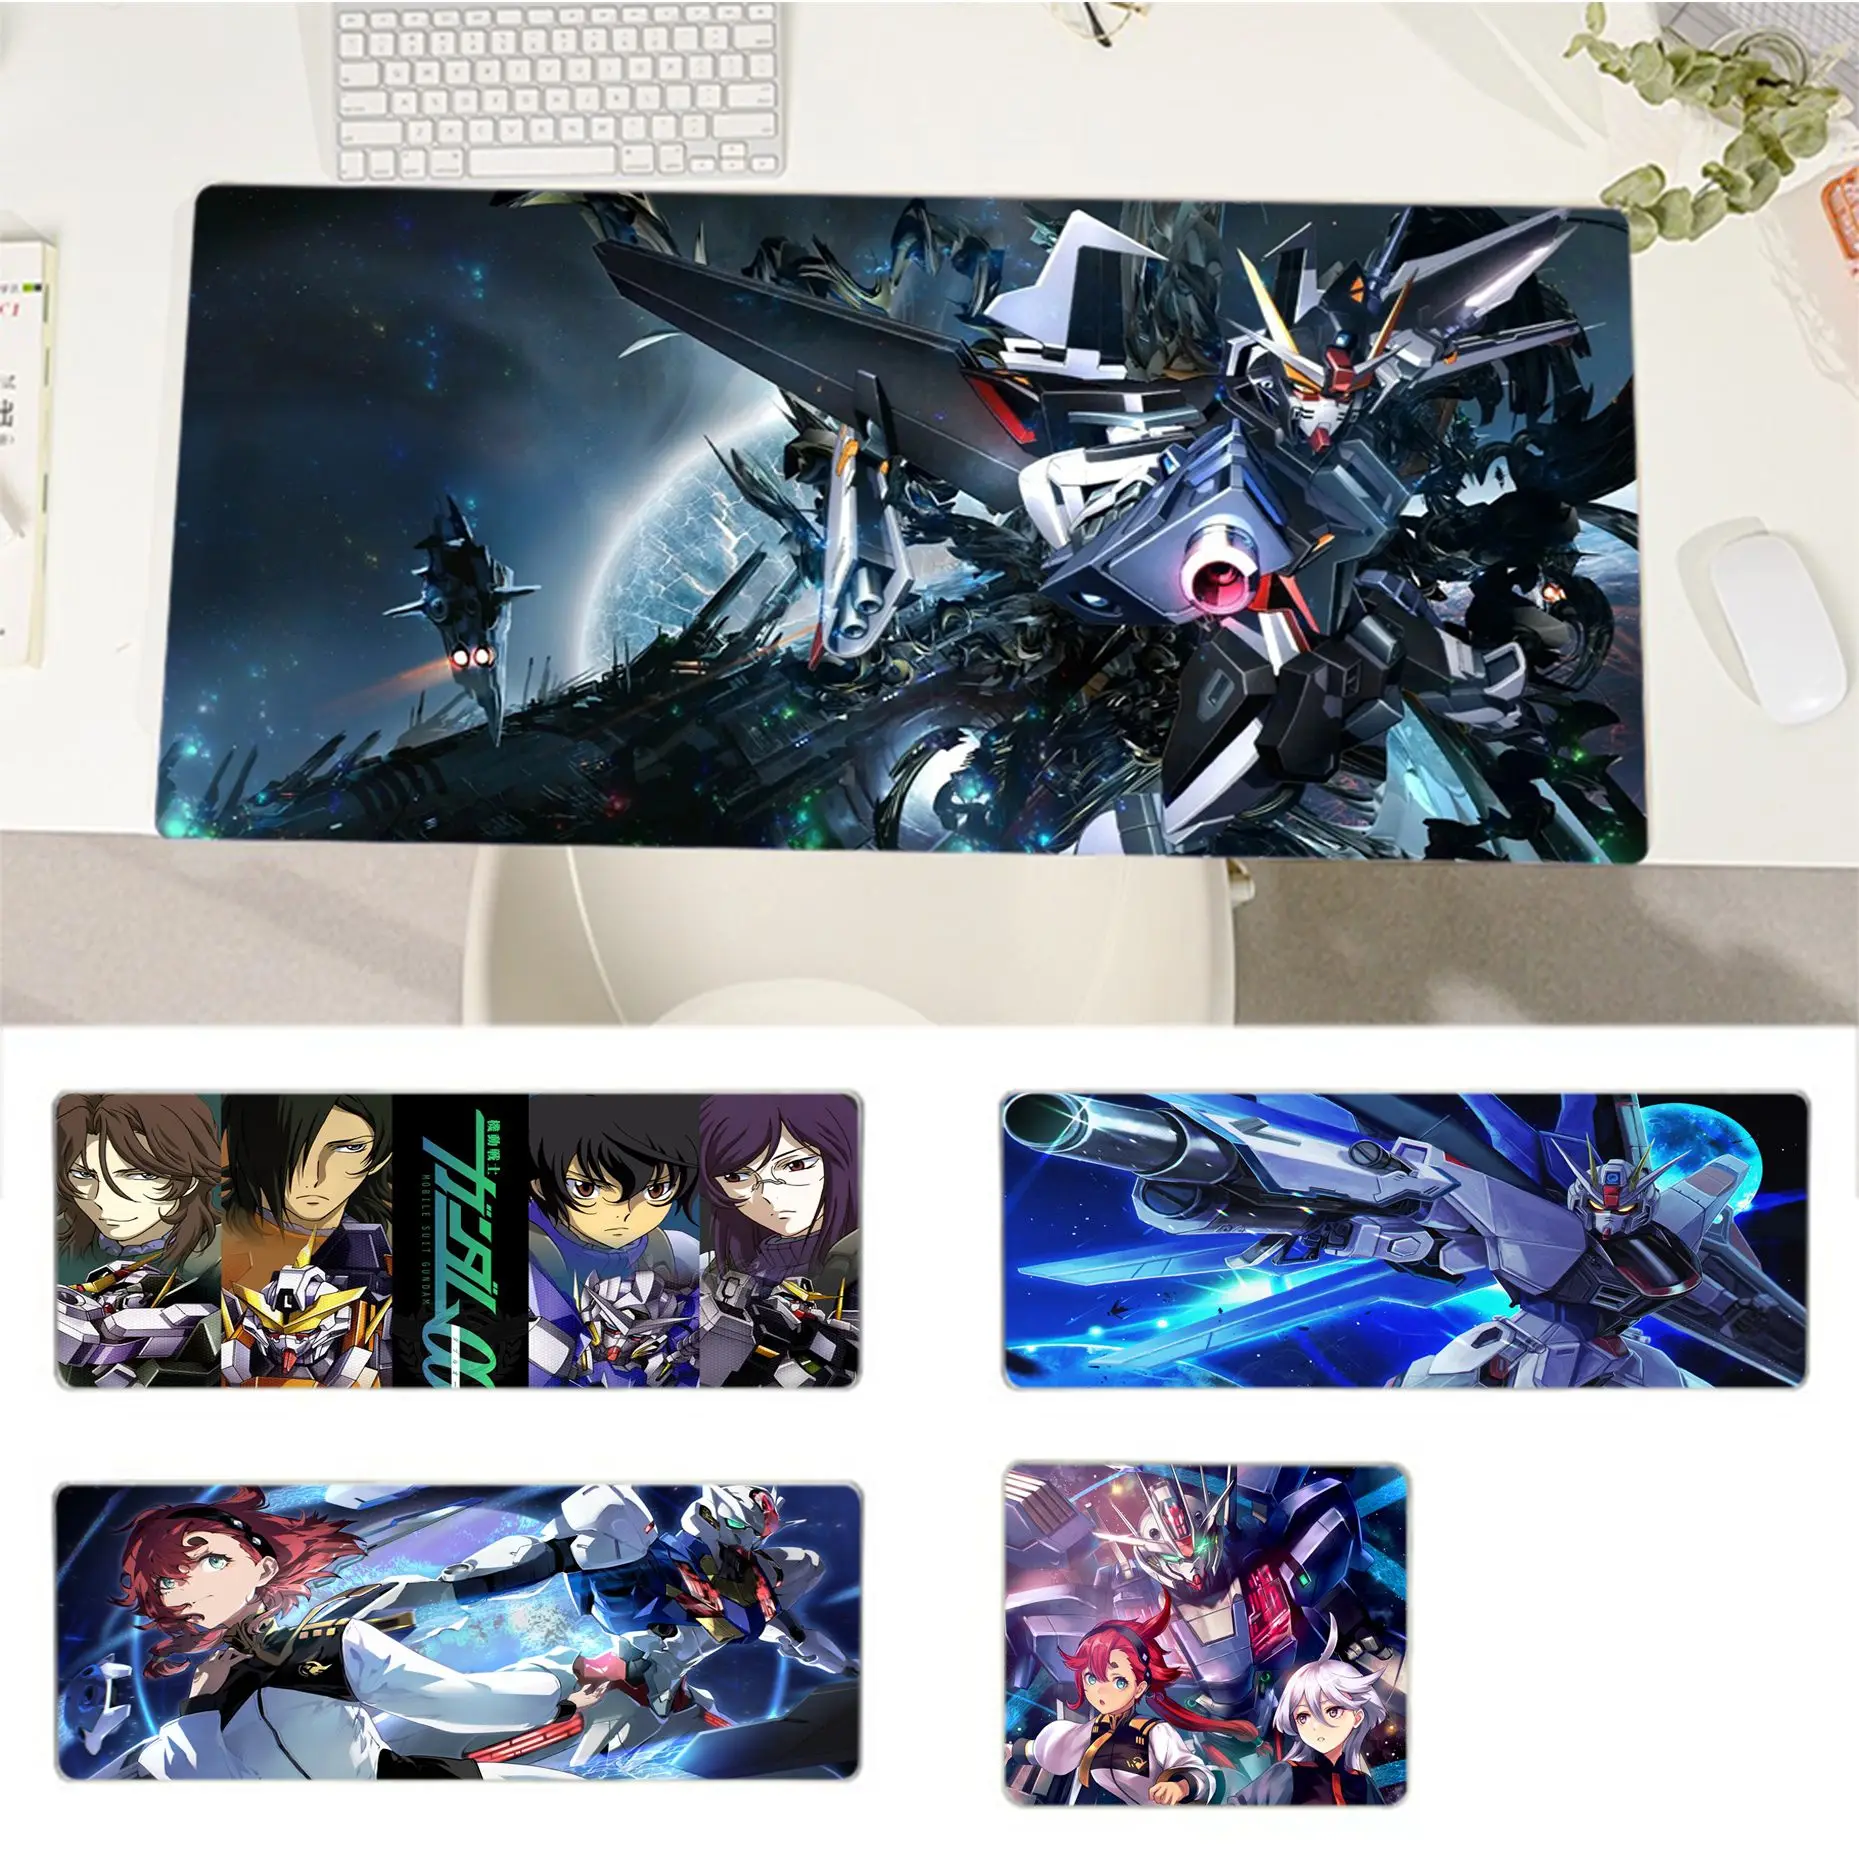 

G-GUNDAMS Mousepad High Quality Customized Laptop Gaming Mouse Pad Size For Gameing World Of Tanks CS GO Zelda